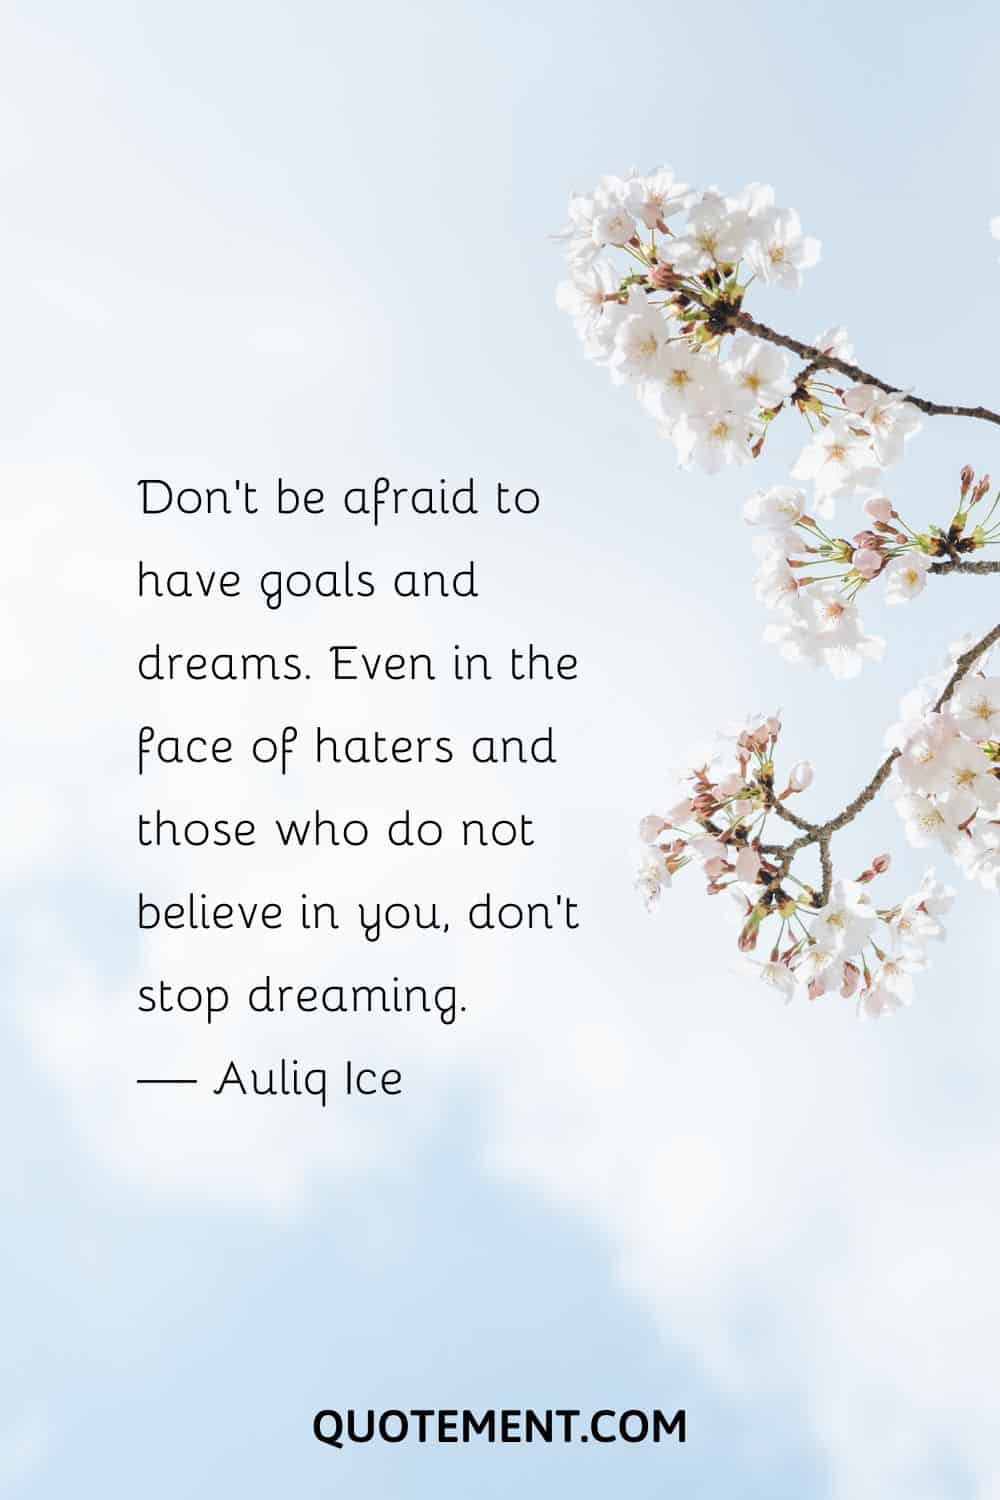 Don’t be afraid to have goals and dreams